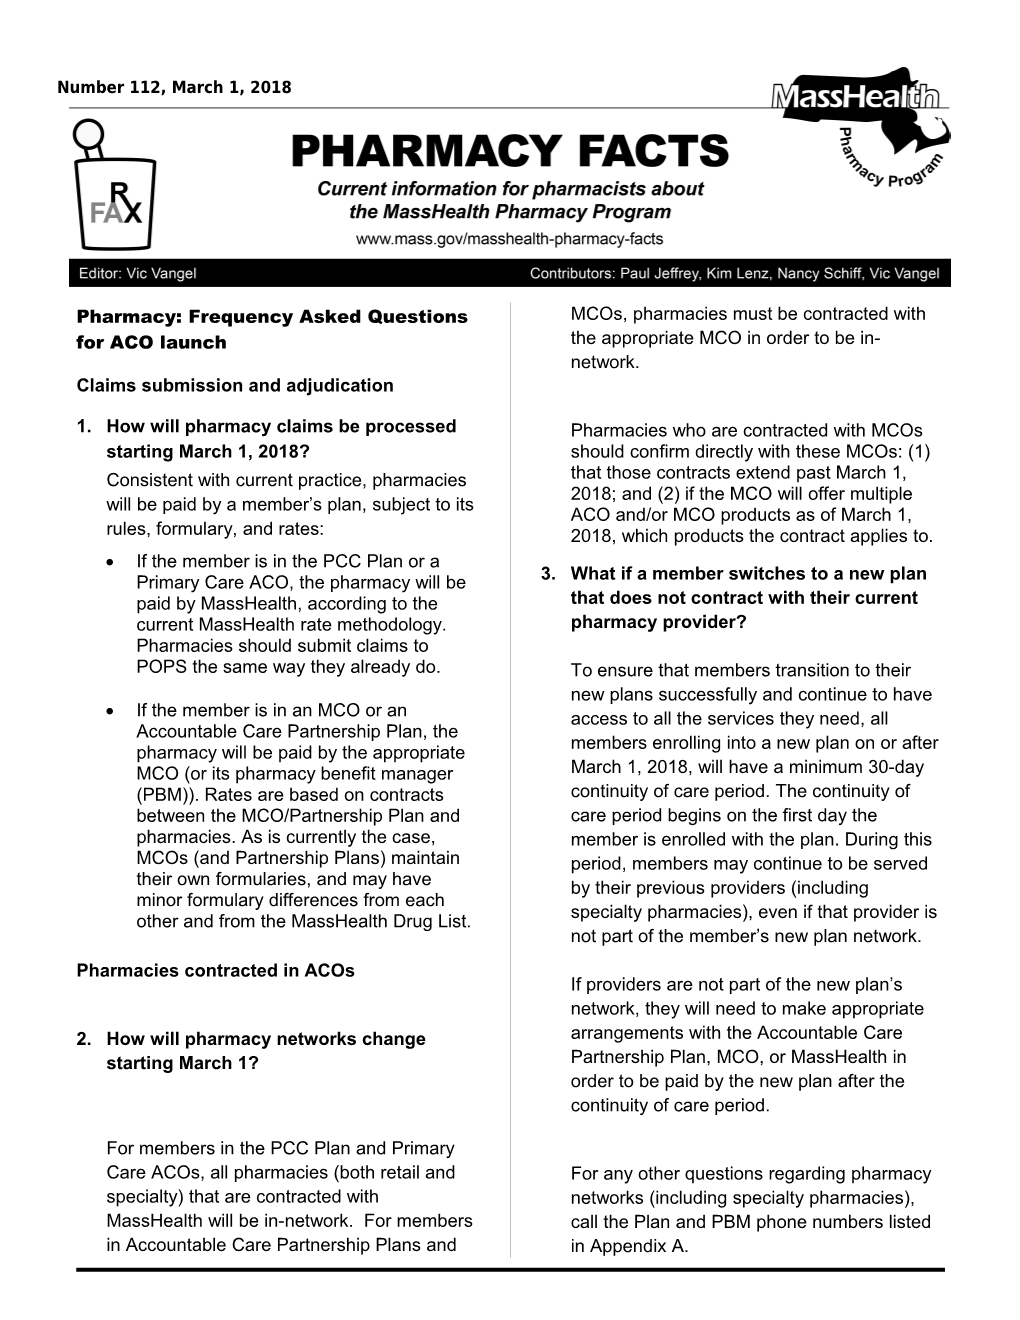 Pharmacy: Frequency Asked Questions for ACO Launch